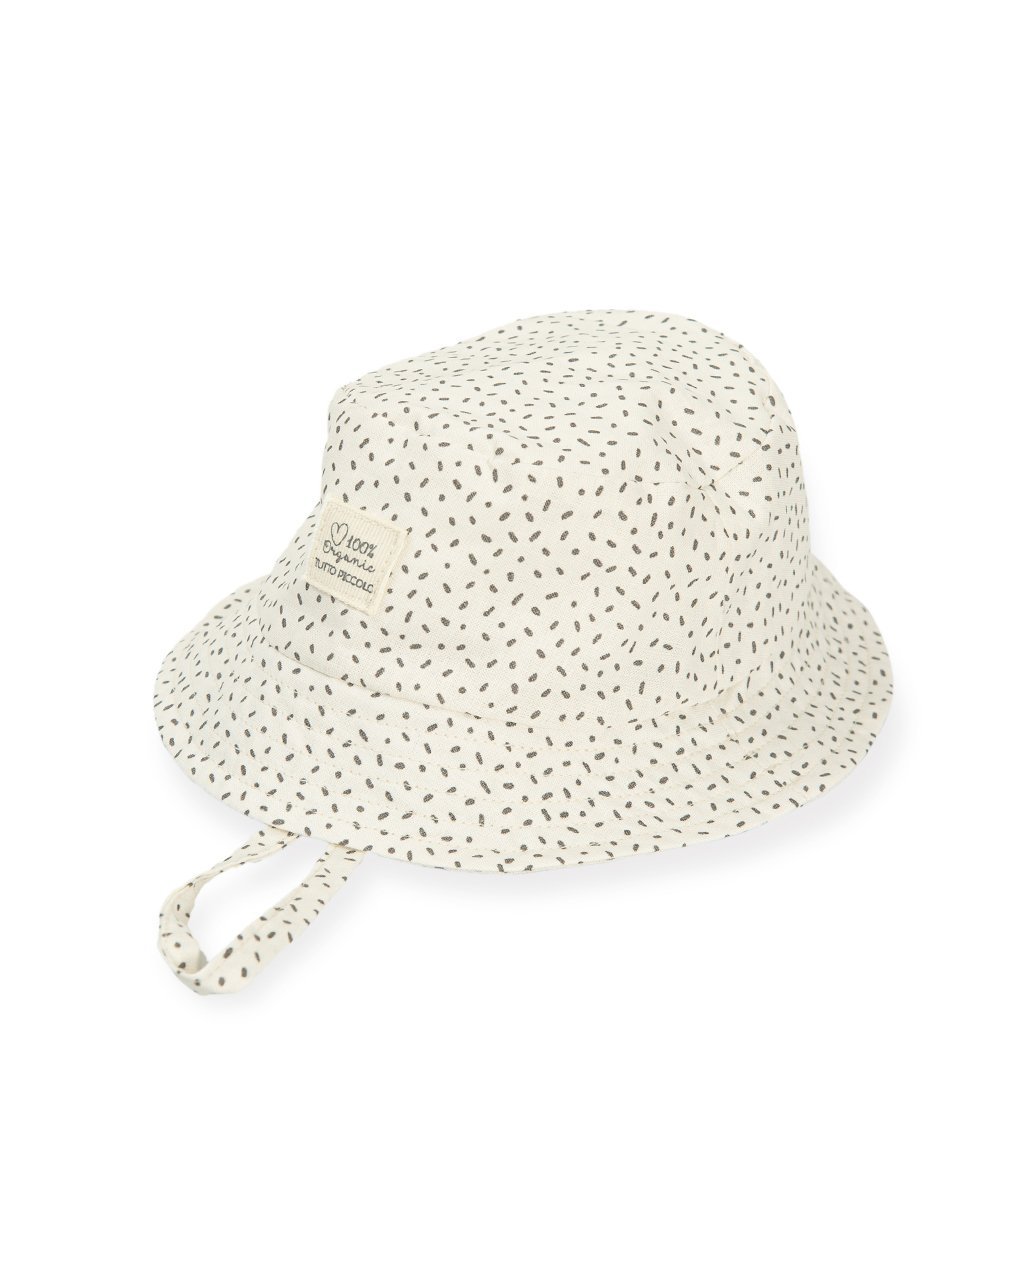 Tutto Piccolo Sprinkle Pattern Sun Hat | Millie and John